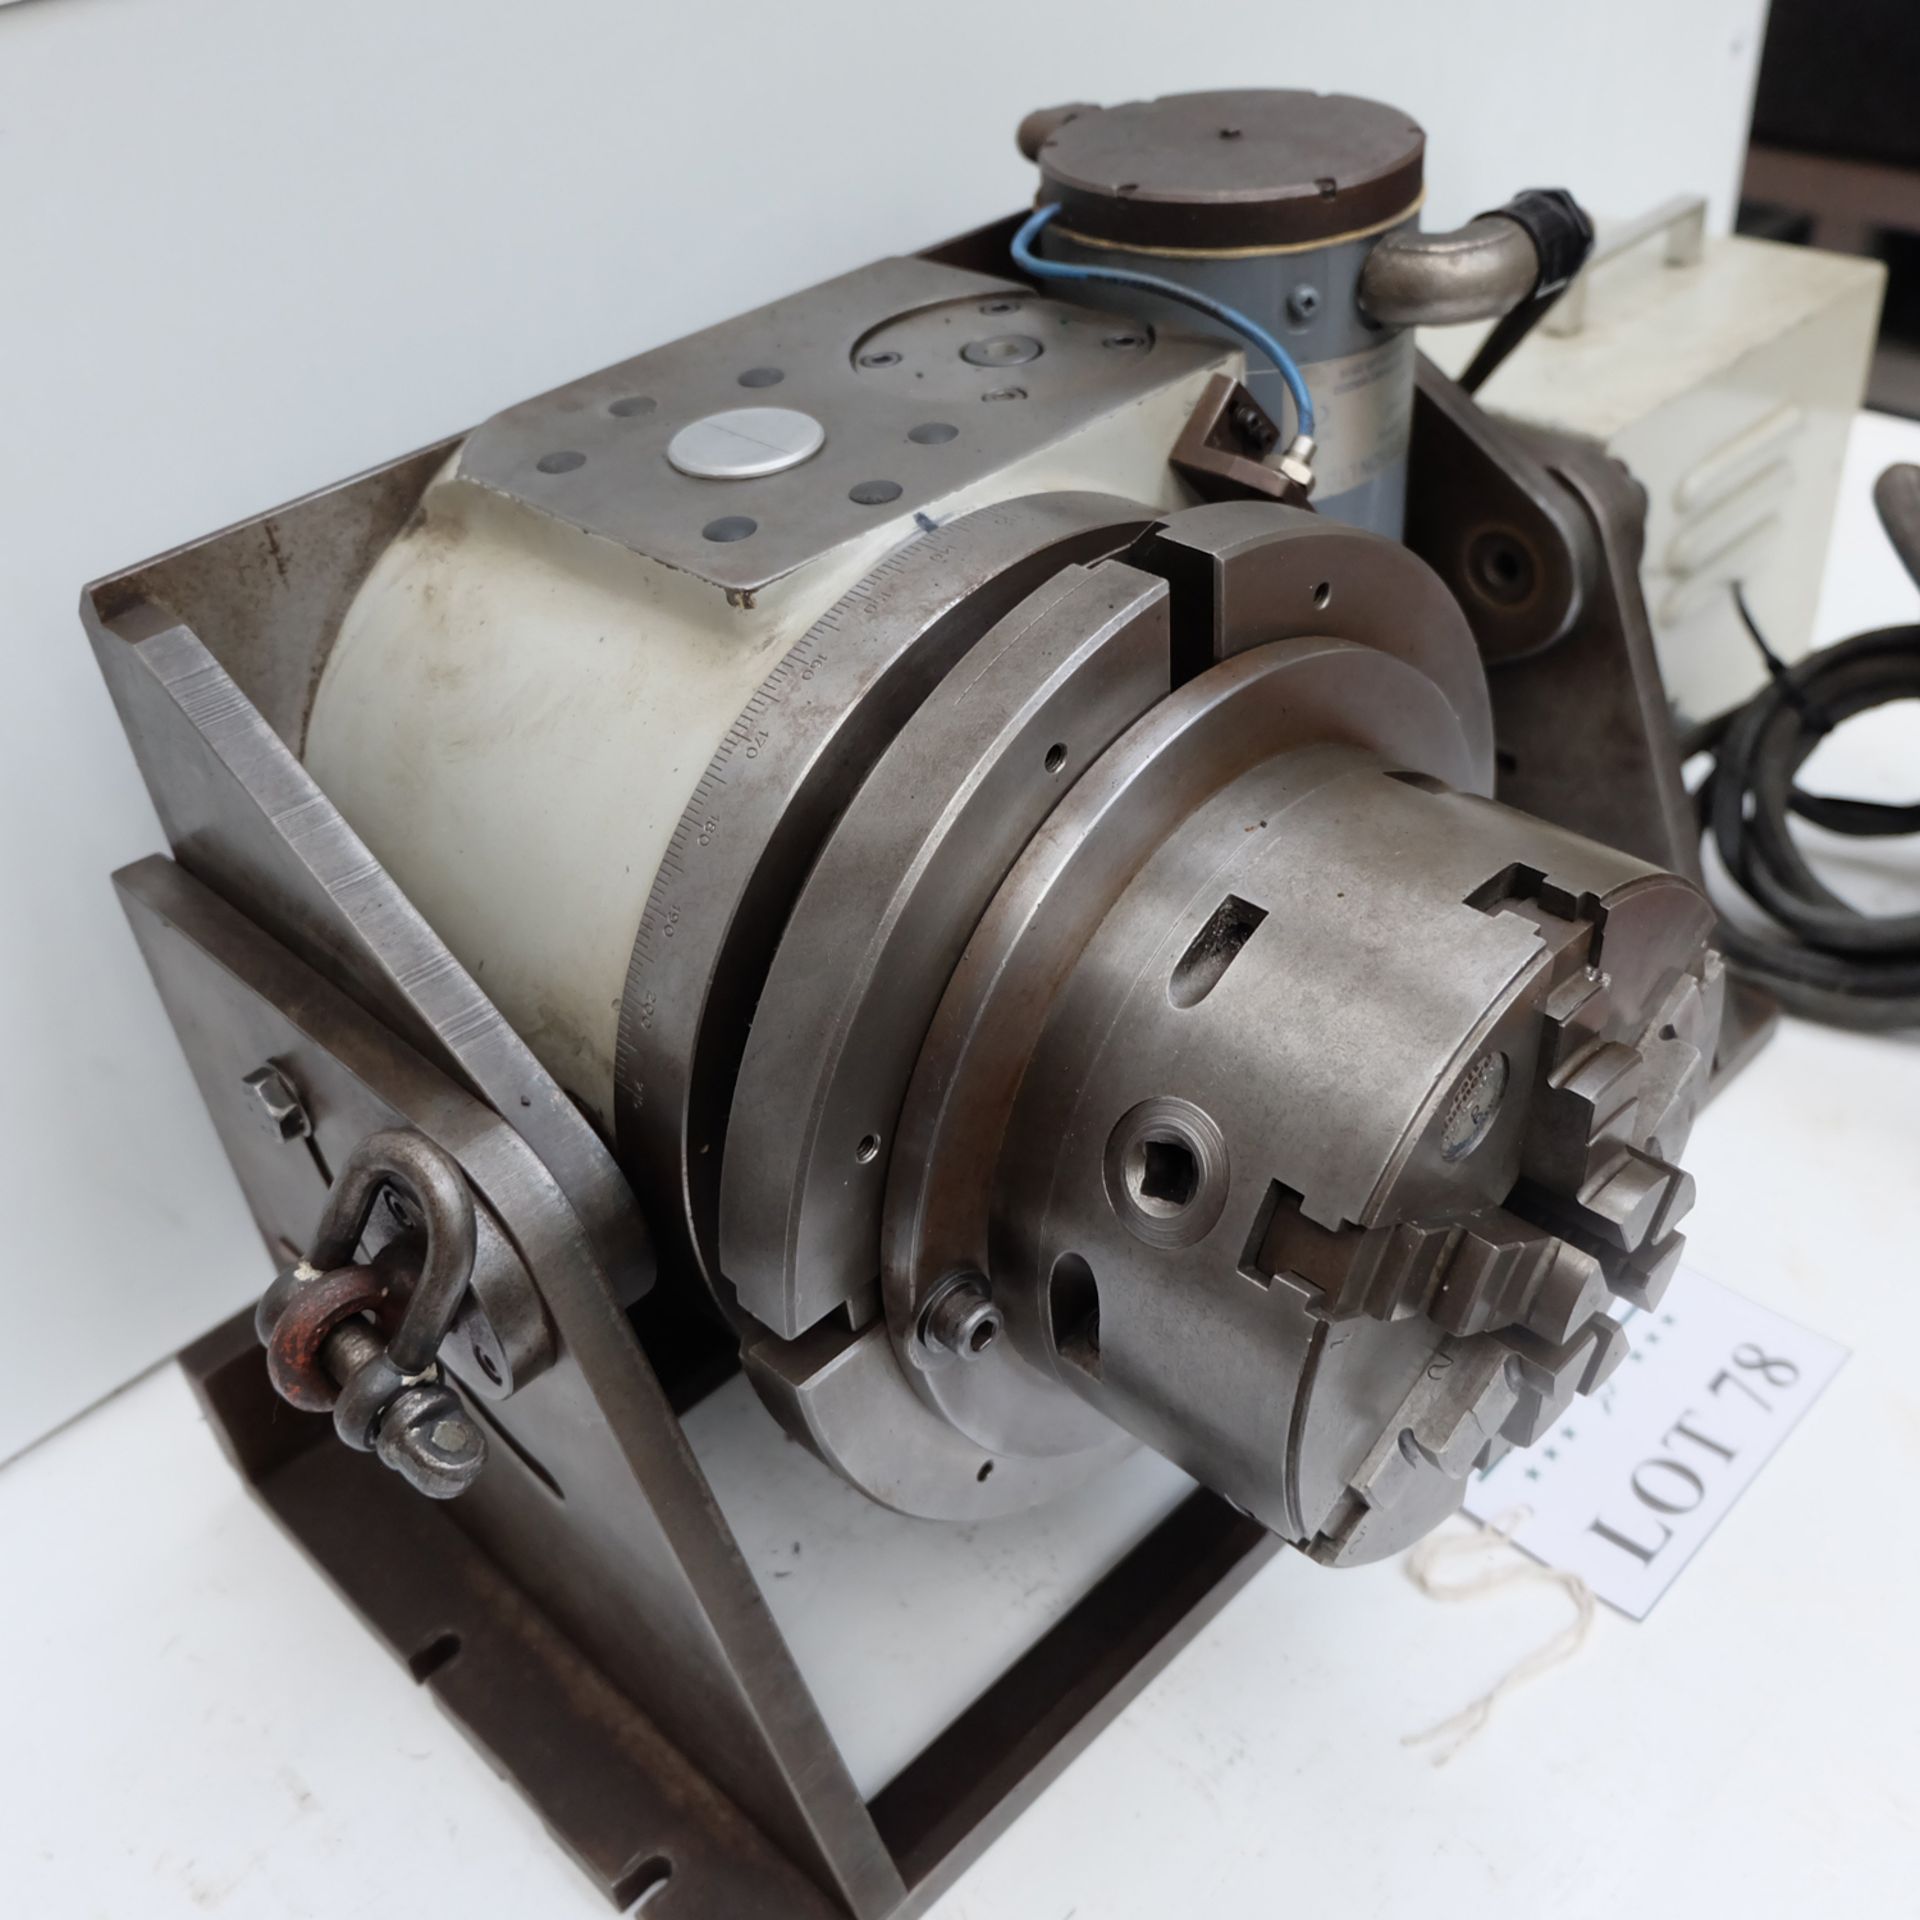 Jones & Shipman Type 58413-001. 8" 4th Axis Tilting & Swivelling Dividing Head. With 6" 5 Jaw Chuck. - Image 2 of 7